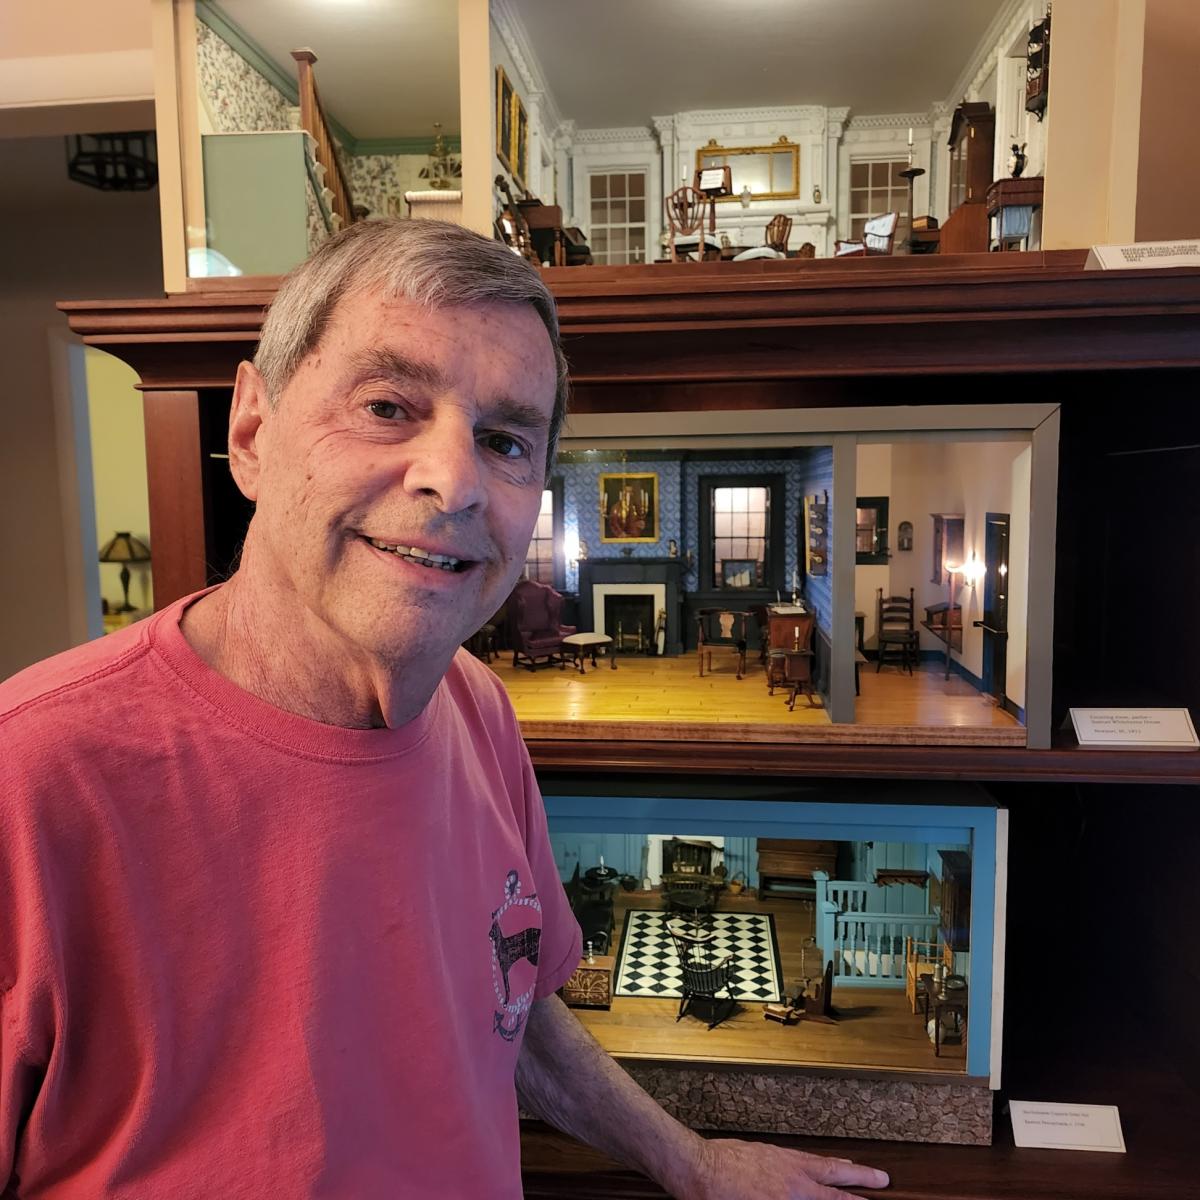 Peter Kendall with one of the miniature houses he made.